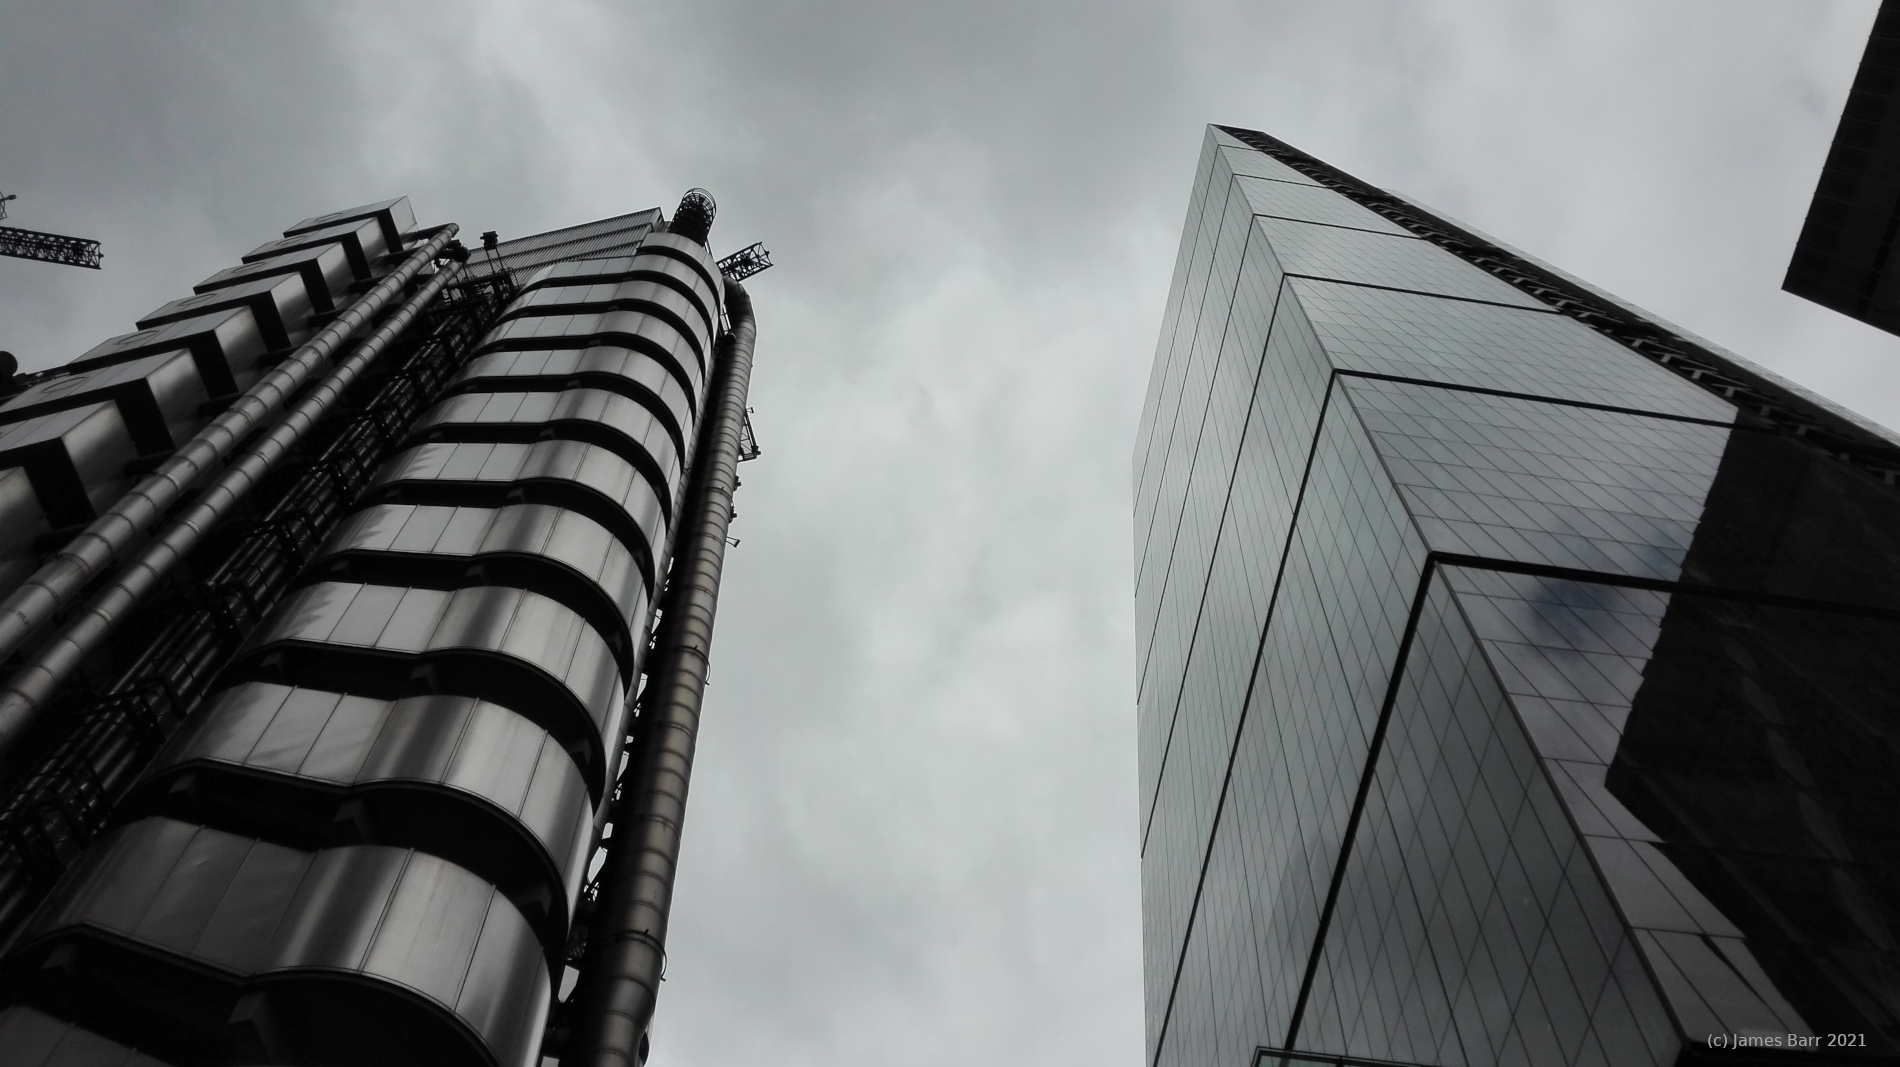 Image of the Lloyds Building.